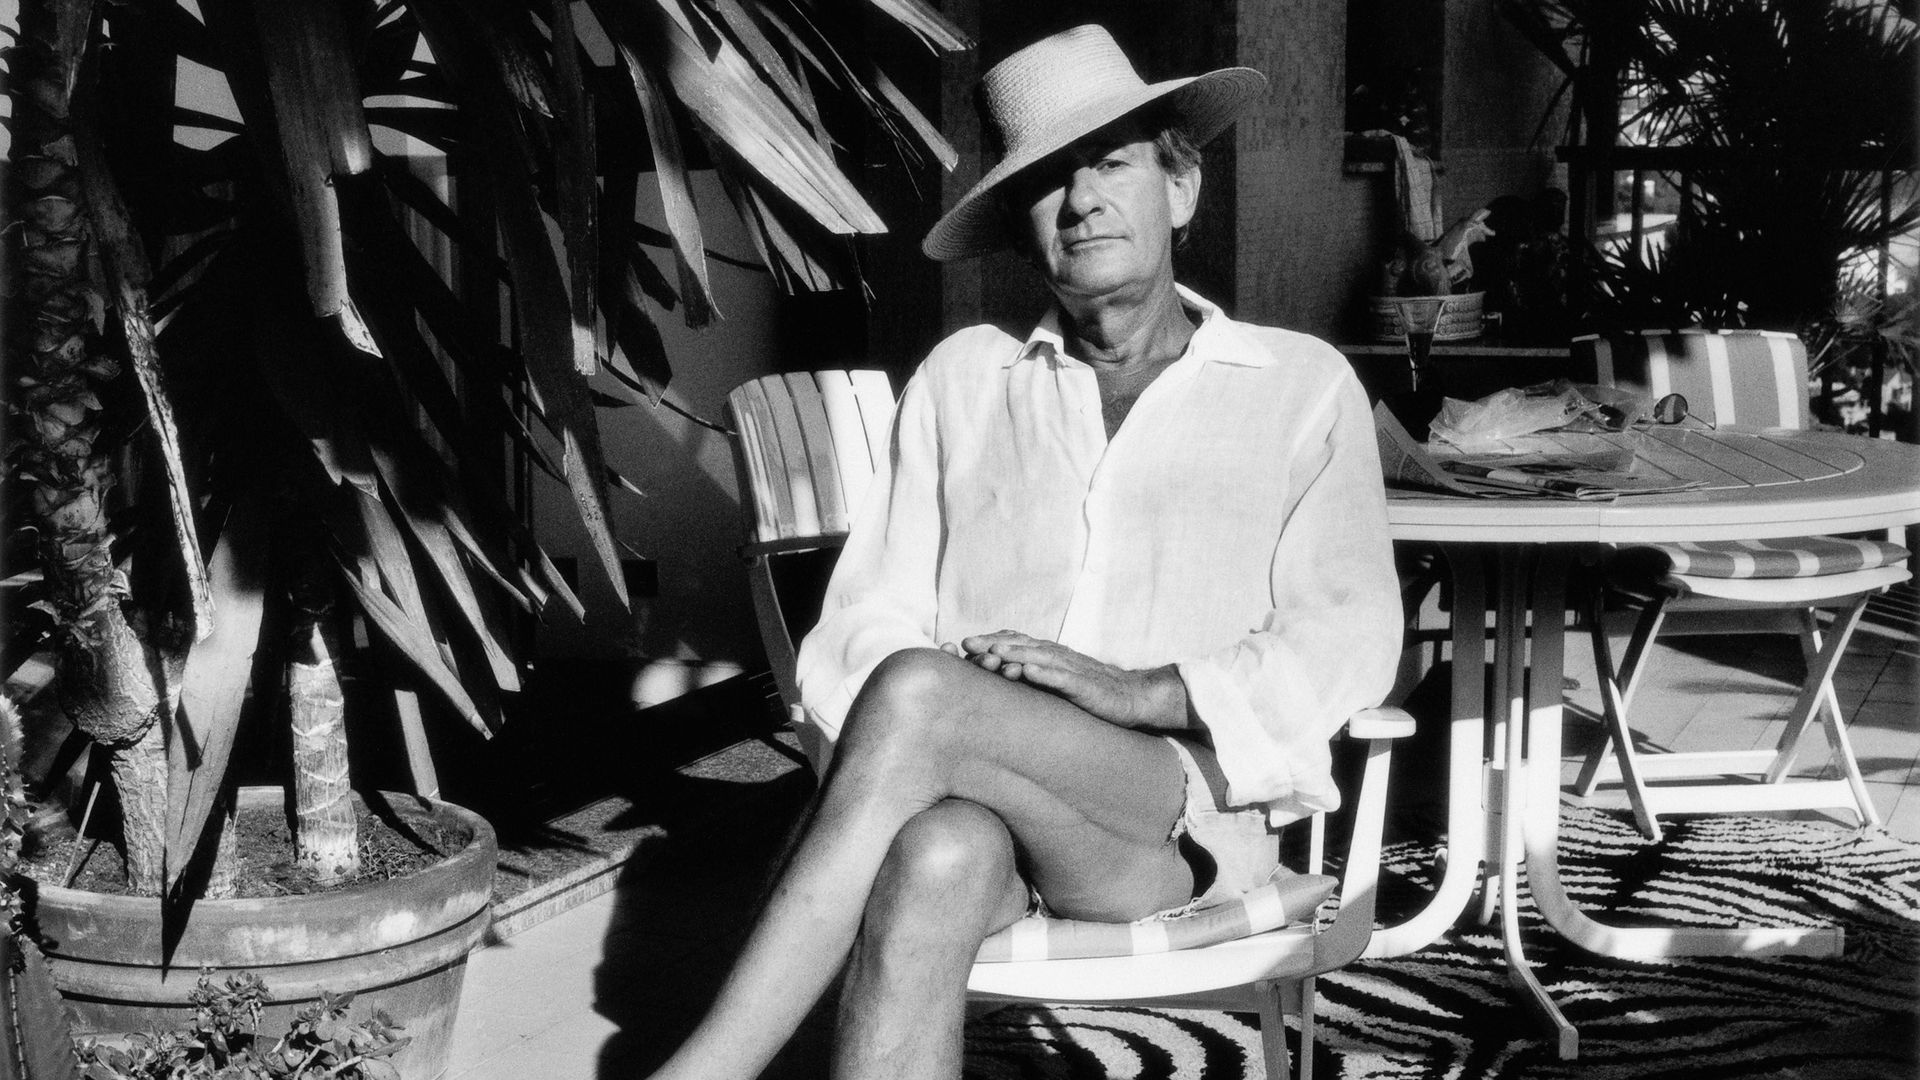 Helmut Newton: The Bad and the Beautiful background